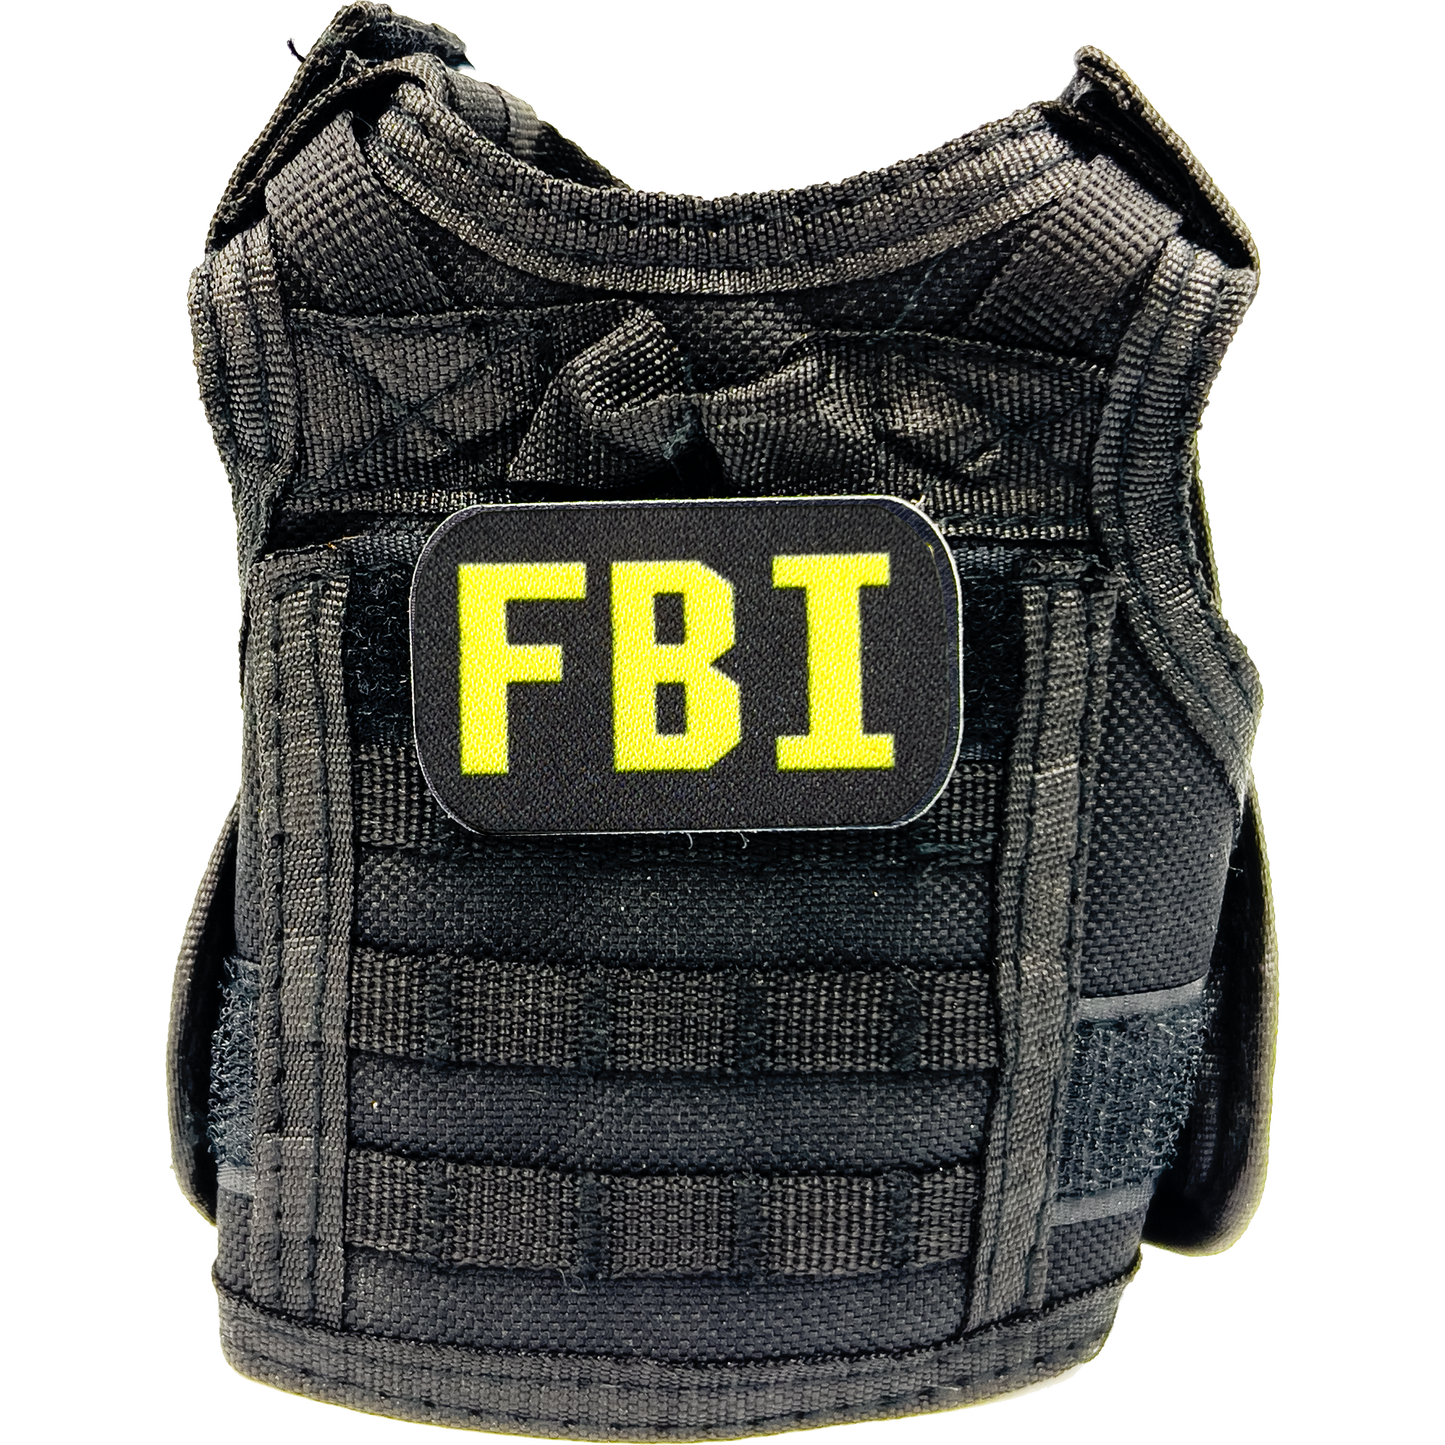 BL1-014 FBI SPECIAL AGENT Tactical Beverage Bottle or Can Cooler Vest with removable patches perfect gift for Challenge Coin collectors